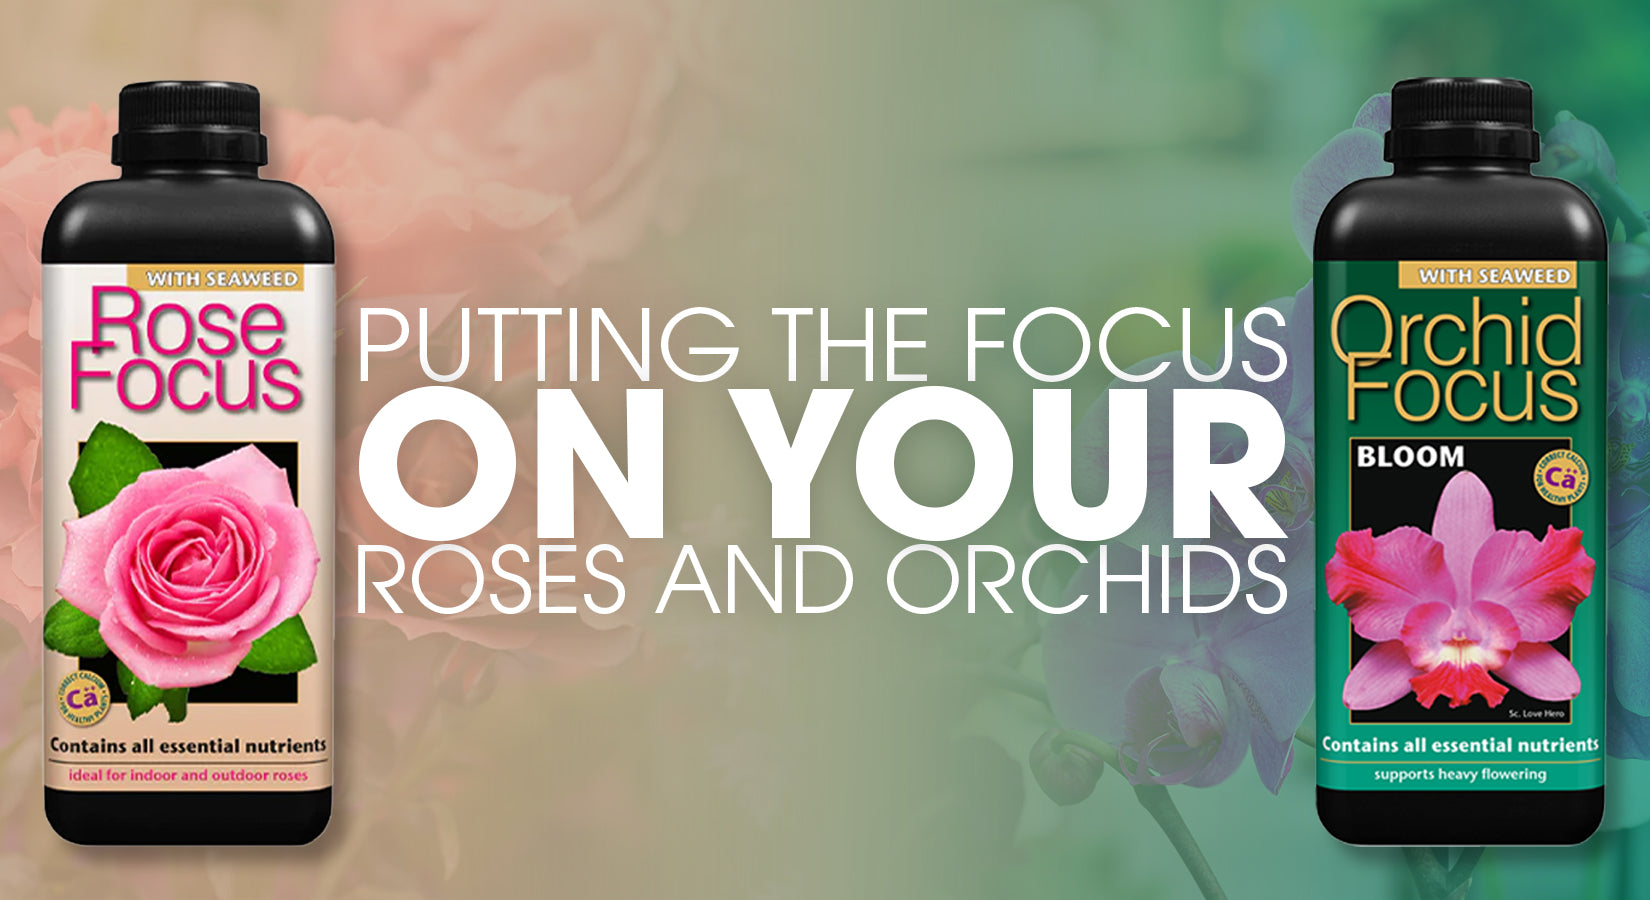 Putting the focus on your Roses and Orchids